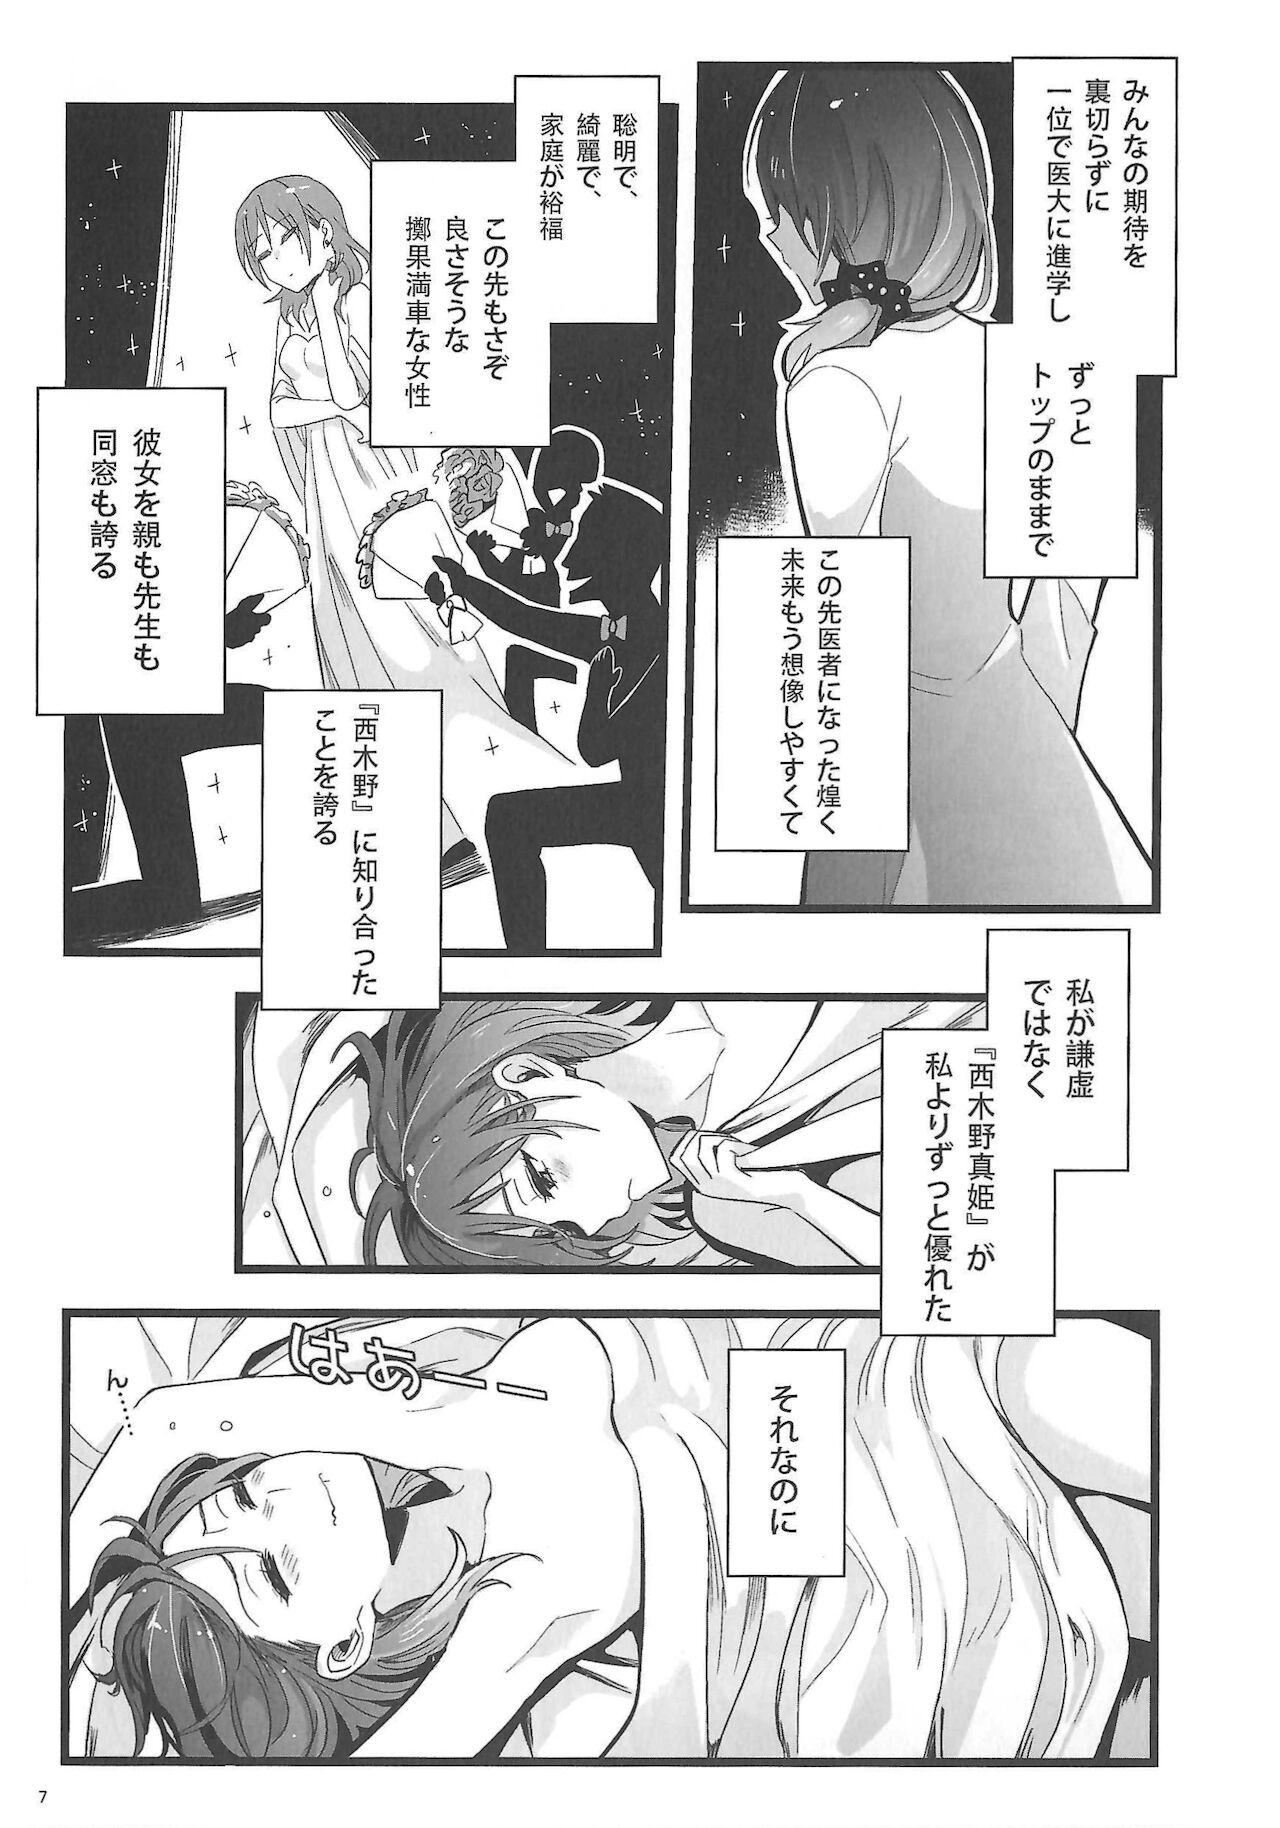 Bra Ode to Losers - Love live Men - Page 8